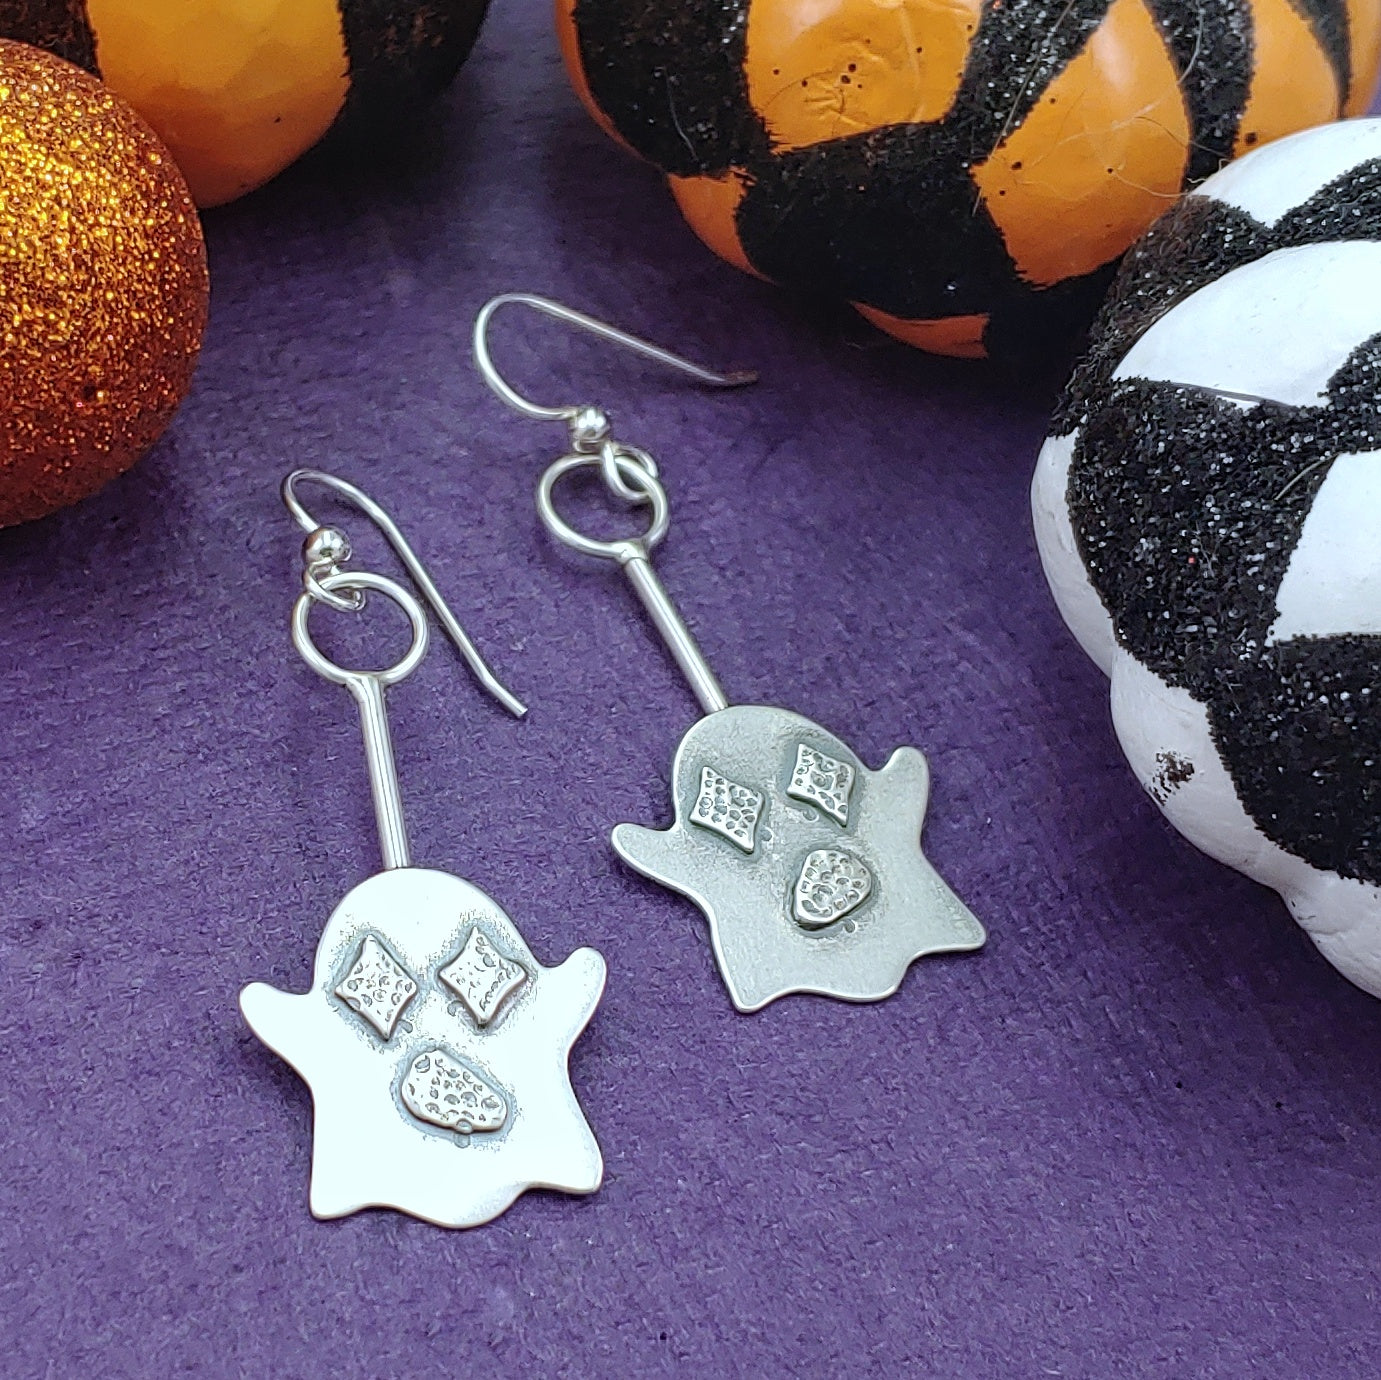 Cute sterling silver ghost dangle earrings with retro star shaped eyes on a purple background surrounded by little colorful pumpkins.